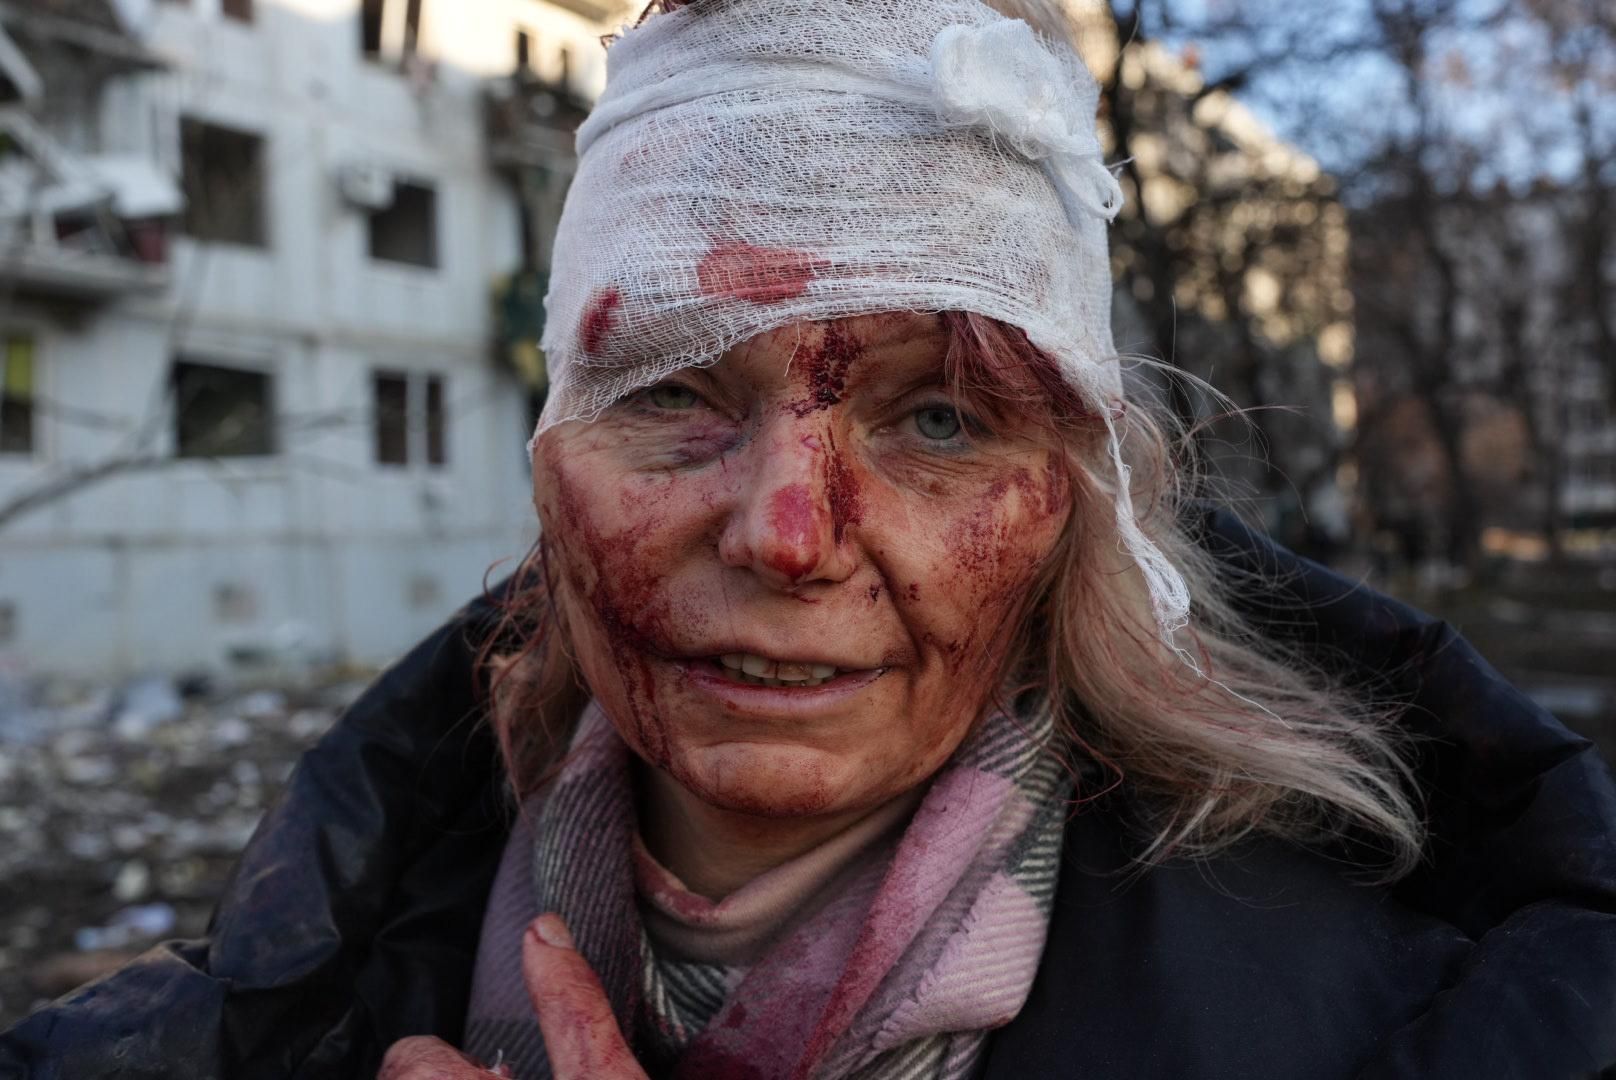 A wounded woman is seen after an apartment complex outside of Kharkiv, Ukraine was hit by Russian bombs on February 24, 2022.